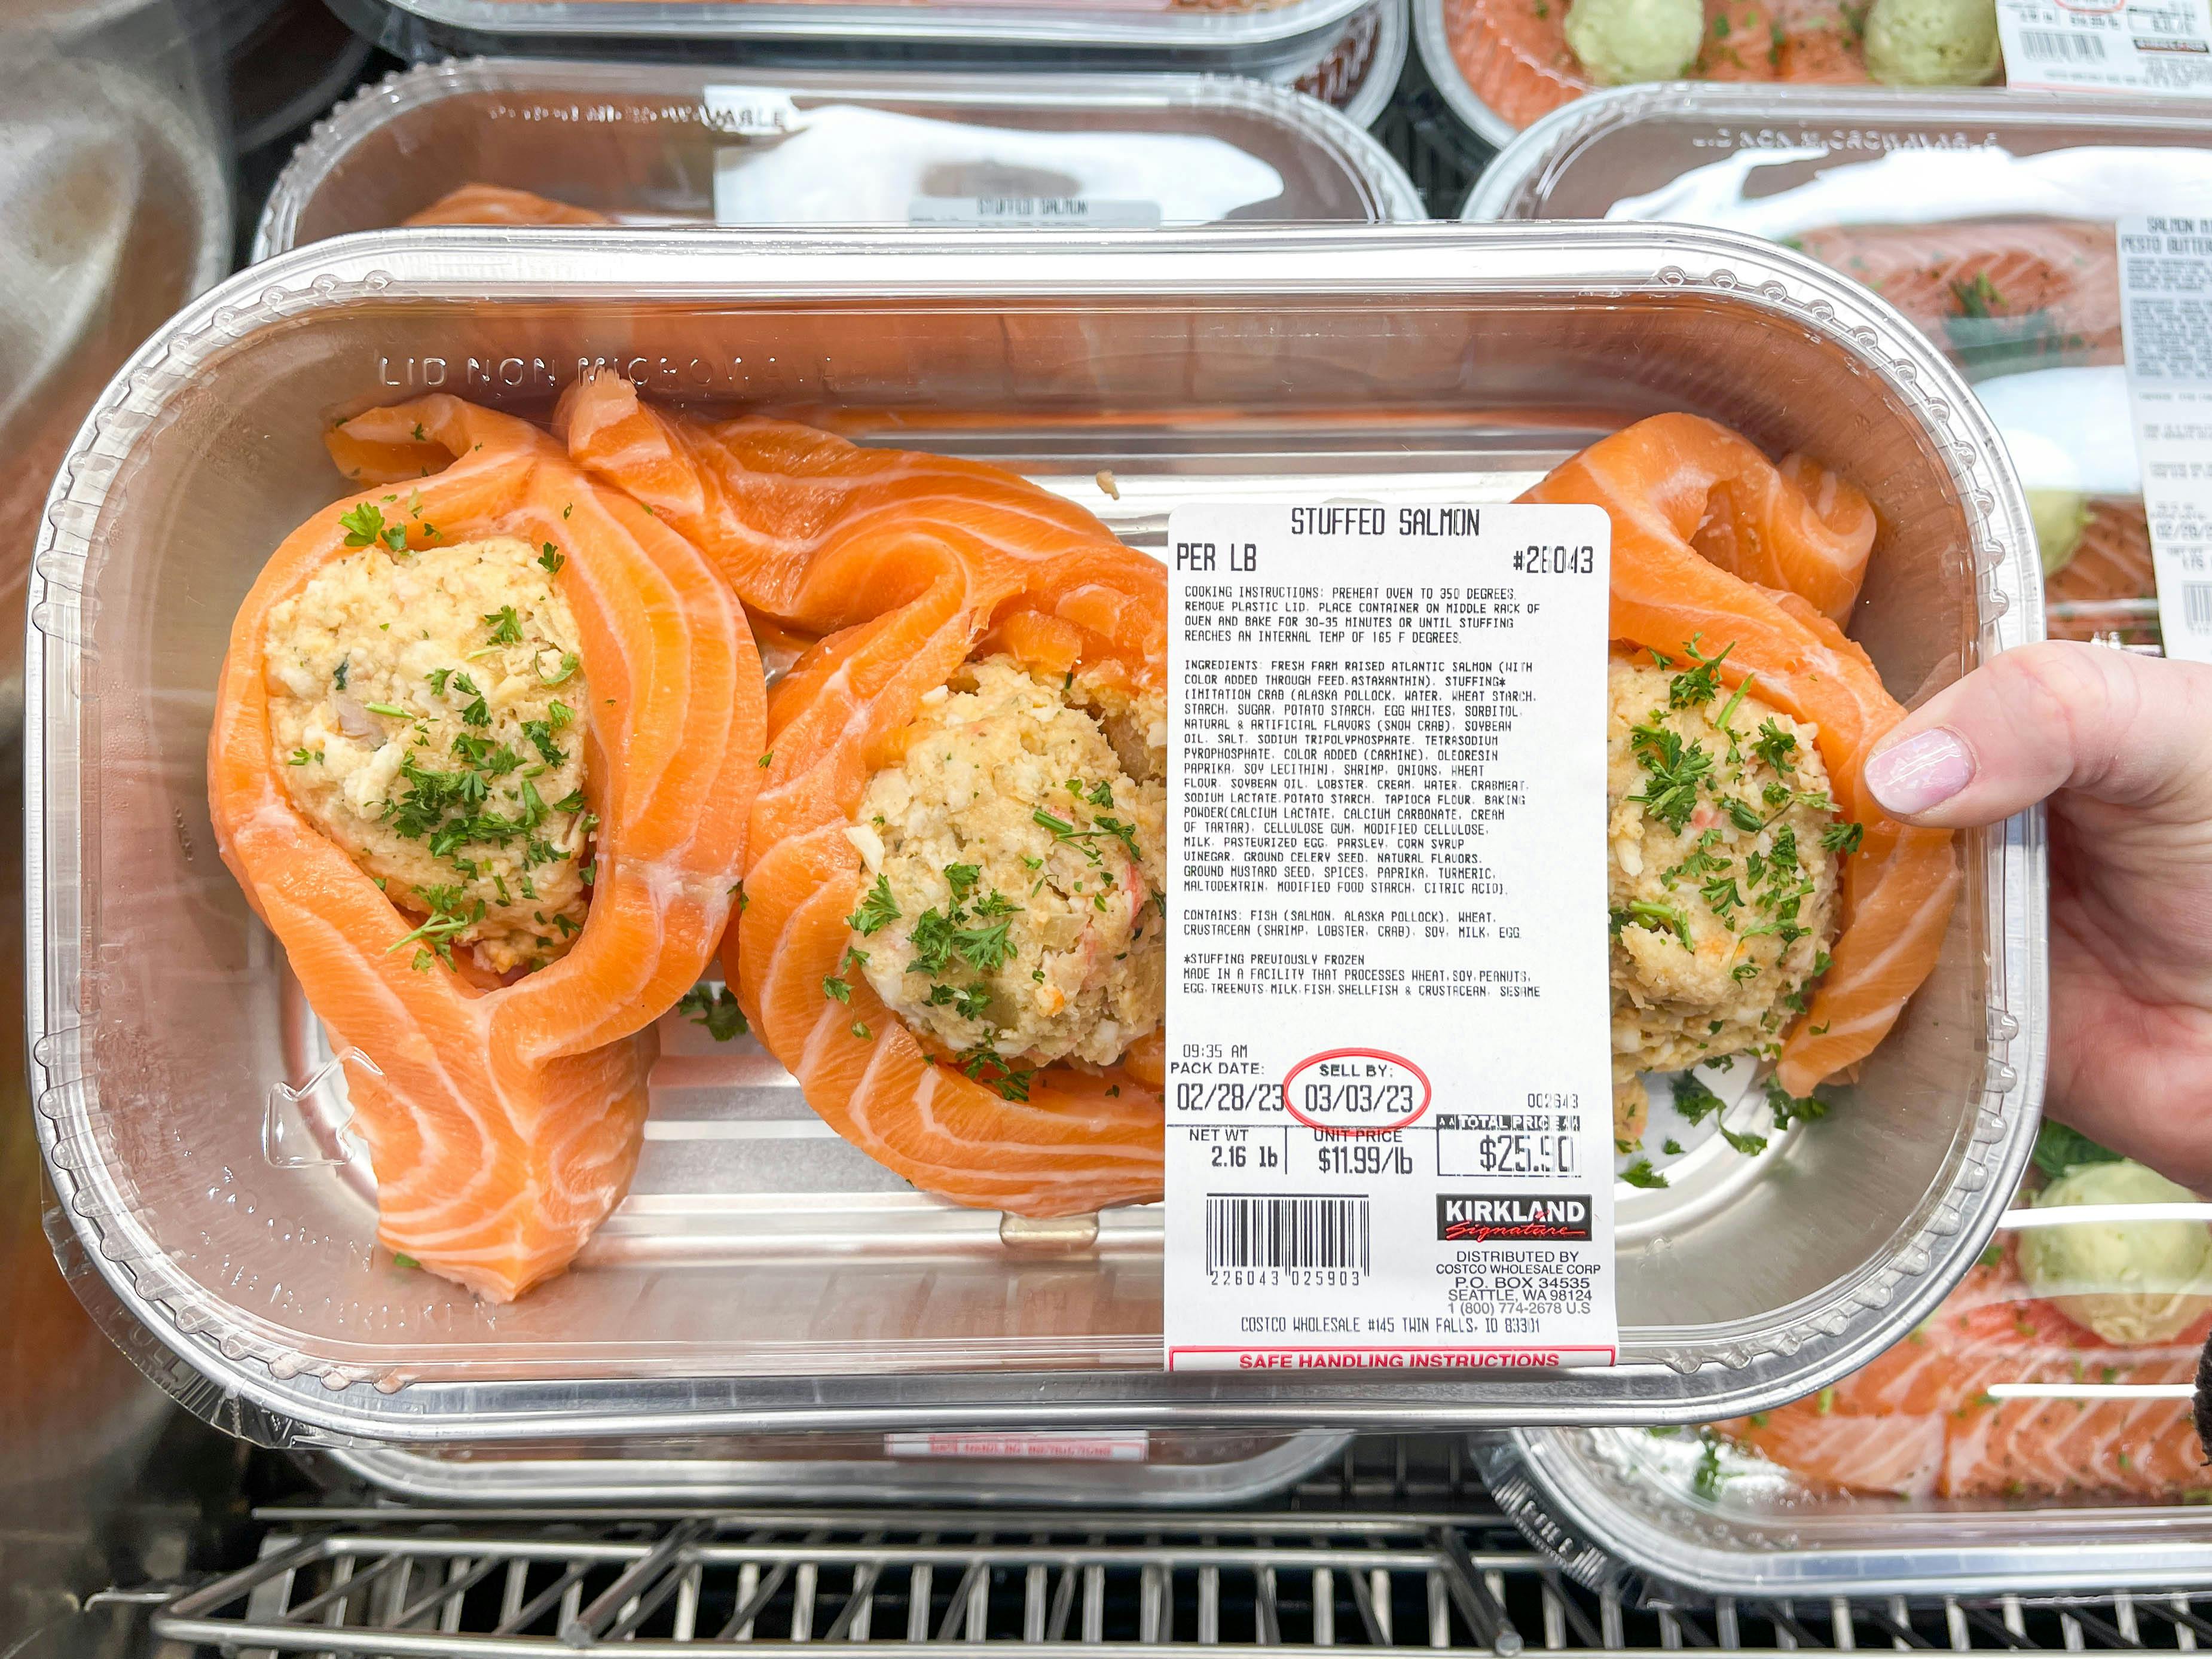 a person holding up a costco stuffed salmon meal in store